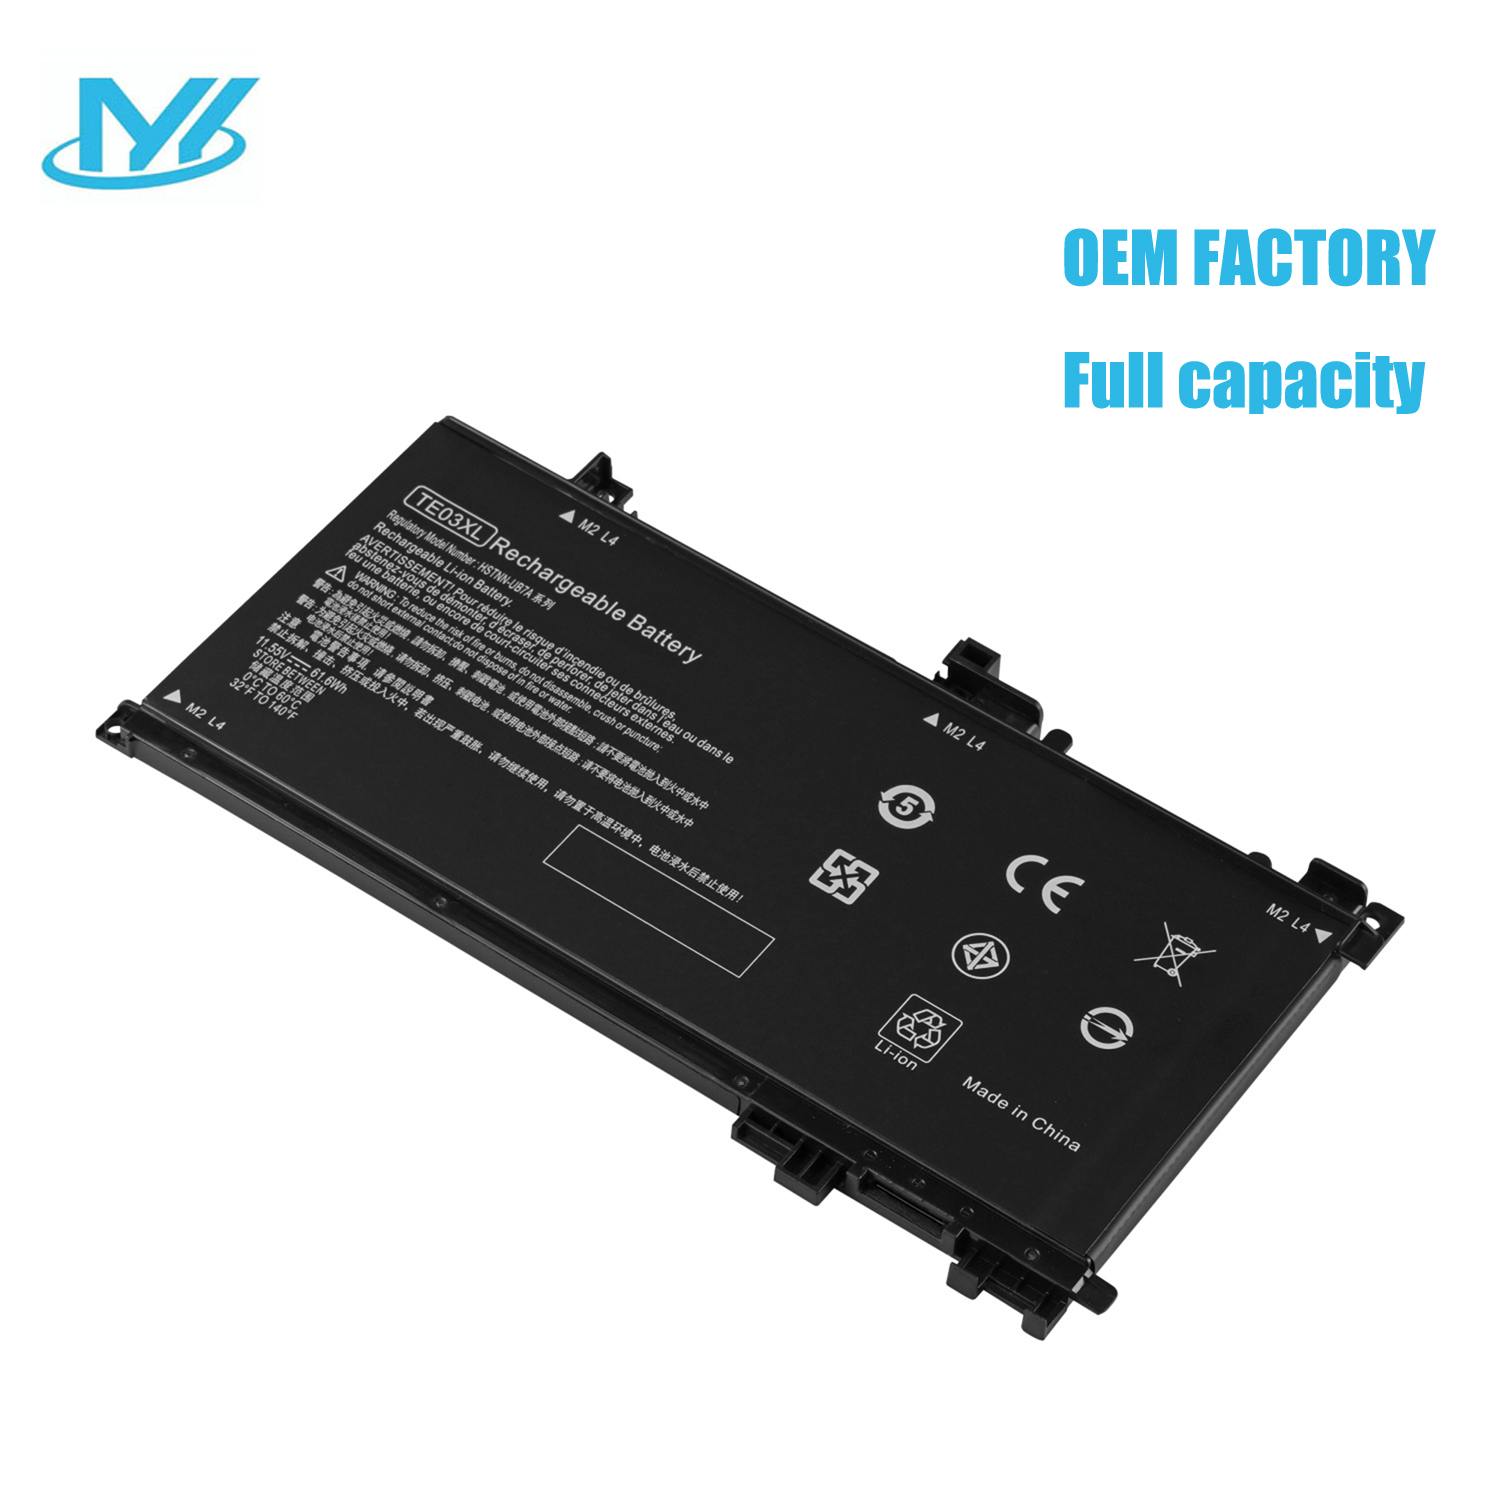 TE03XL rechargeable lithium ion Notebook battery Laptop battery For Hp EliteBook 15 PC Series high capacity TE03XL HSTNN-UB7A TPN-Q173 original 11.55V 61.6Wh 3cell